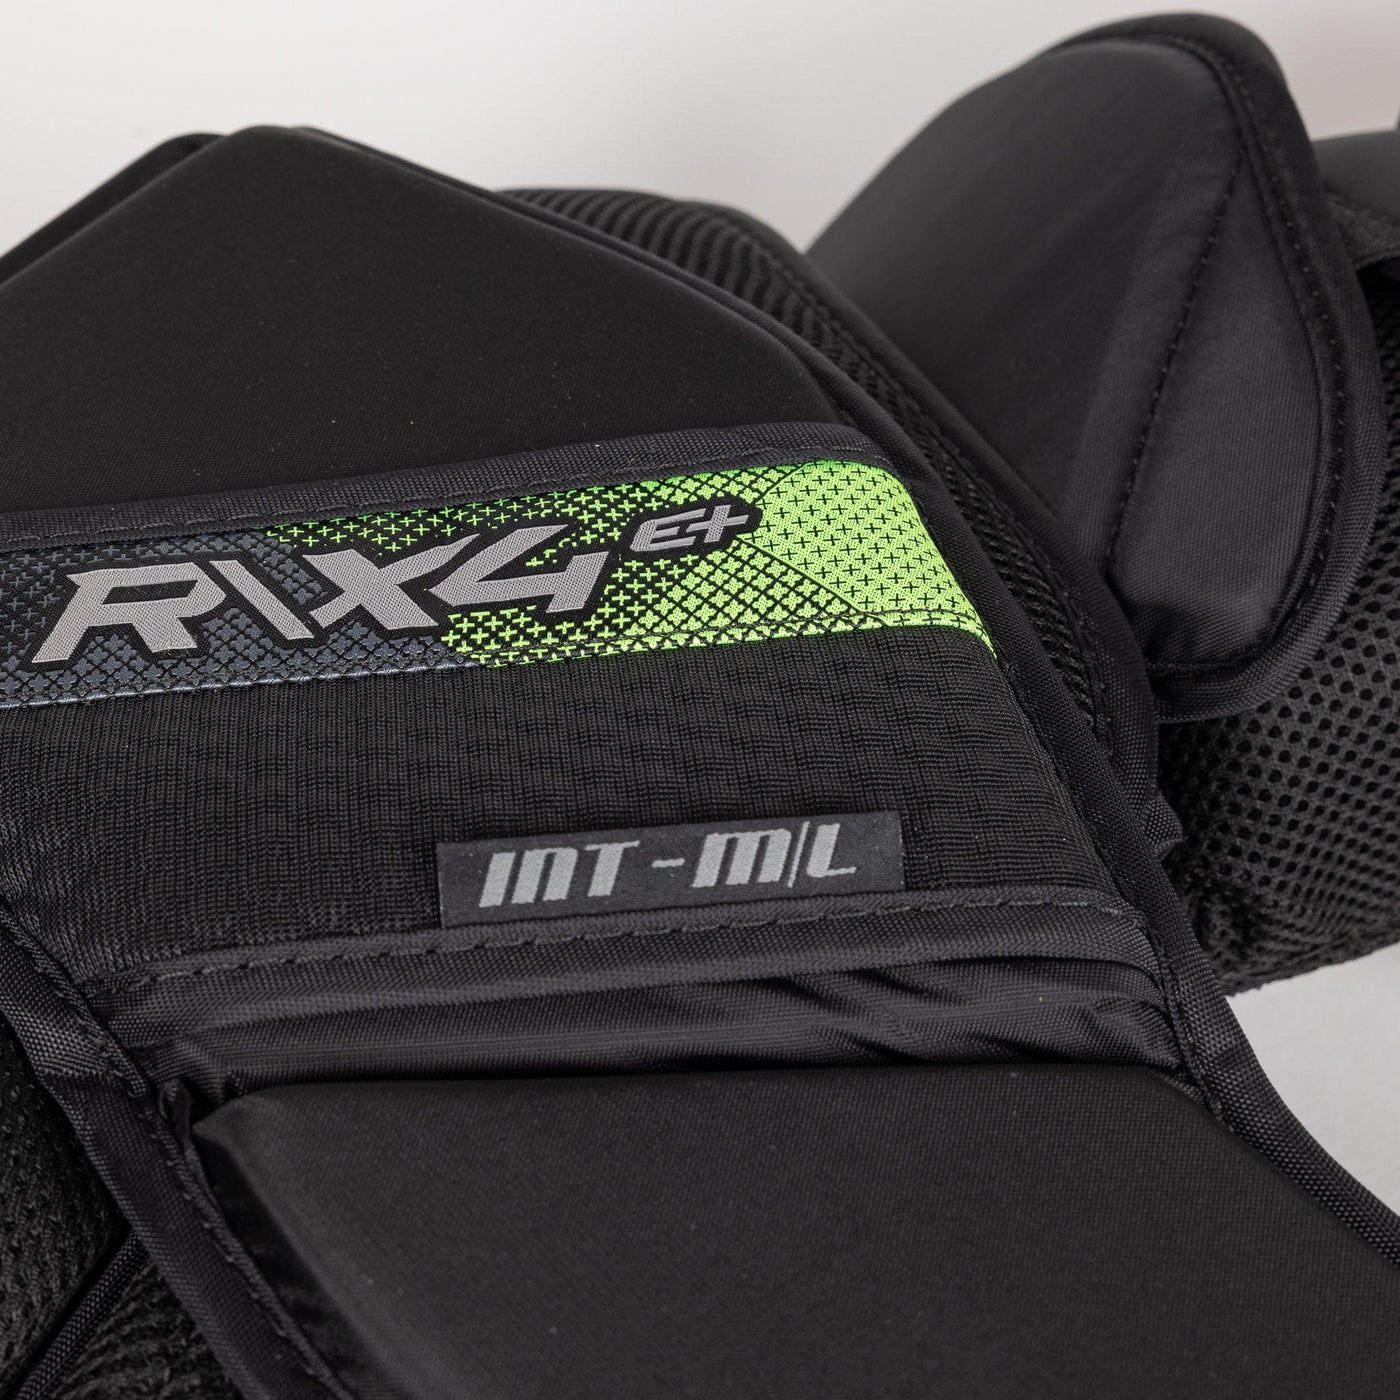 Warrior Ritual X4 E+ Intermediate Chest & Arm Protector - The Hockey Shop Source For Sports